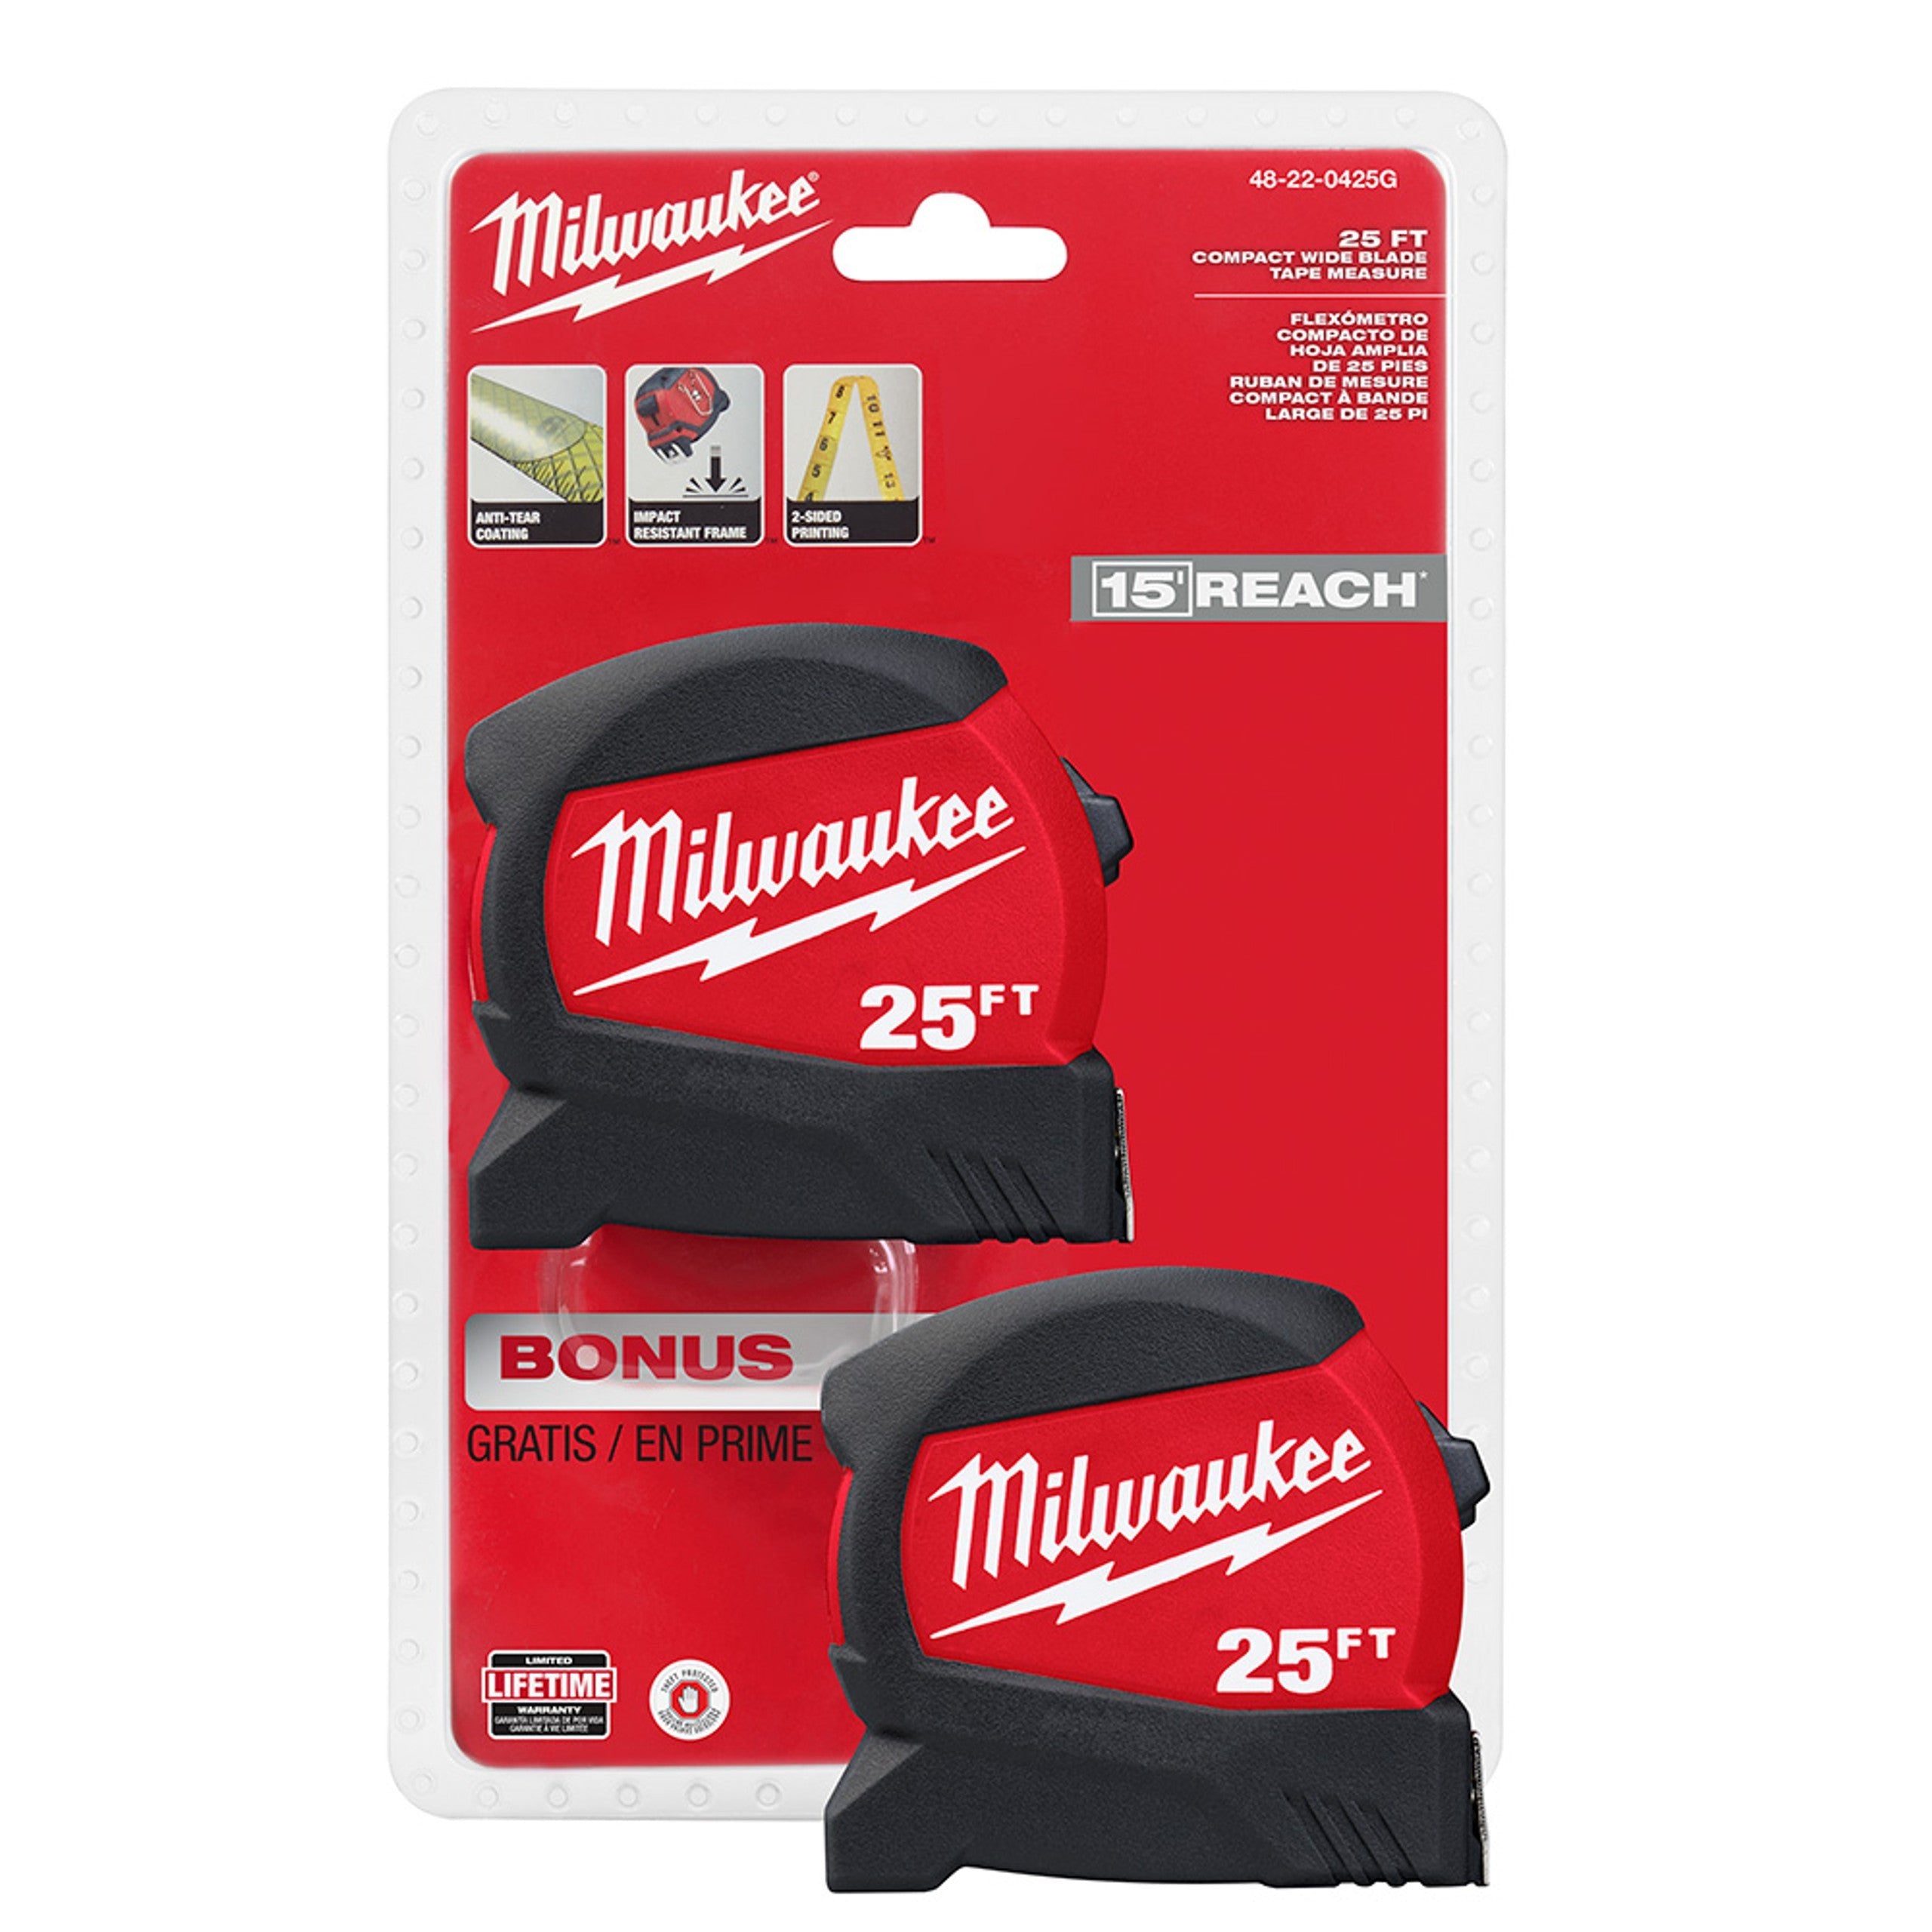 Milwaukee MIL-48-22-0425R - 25FT Compact Wide Blade Tape Measure 2-Pack